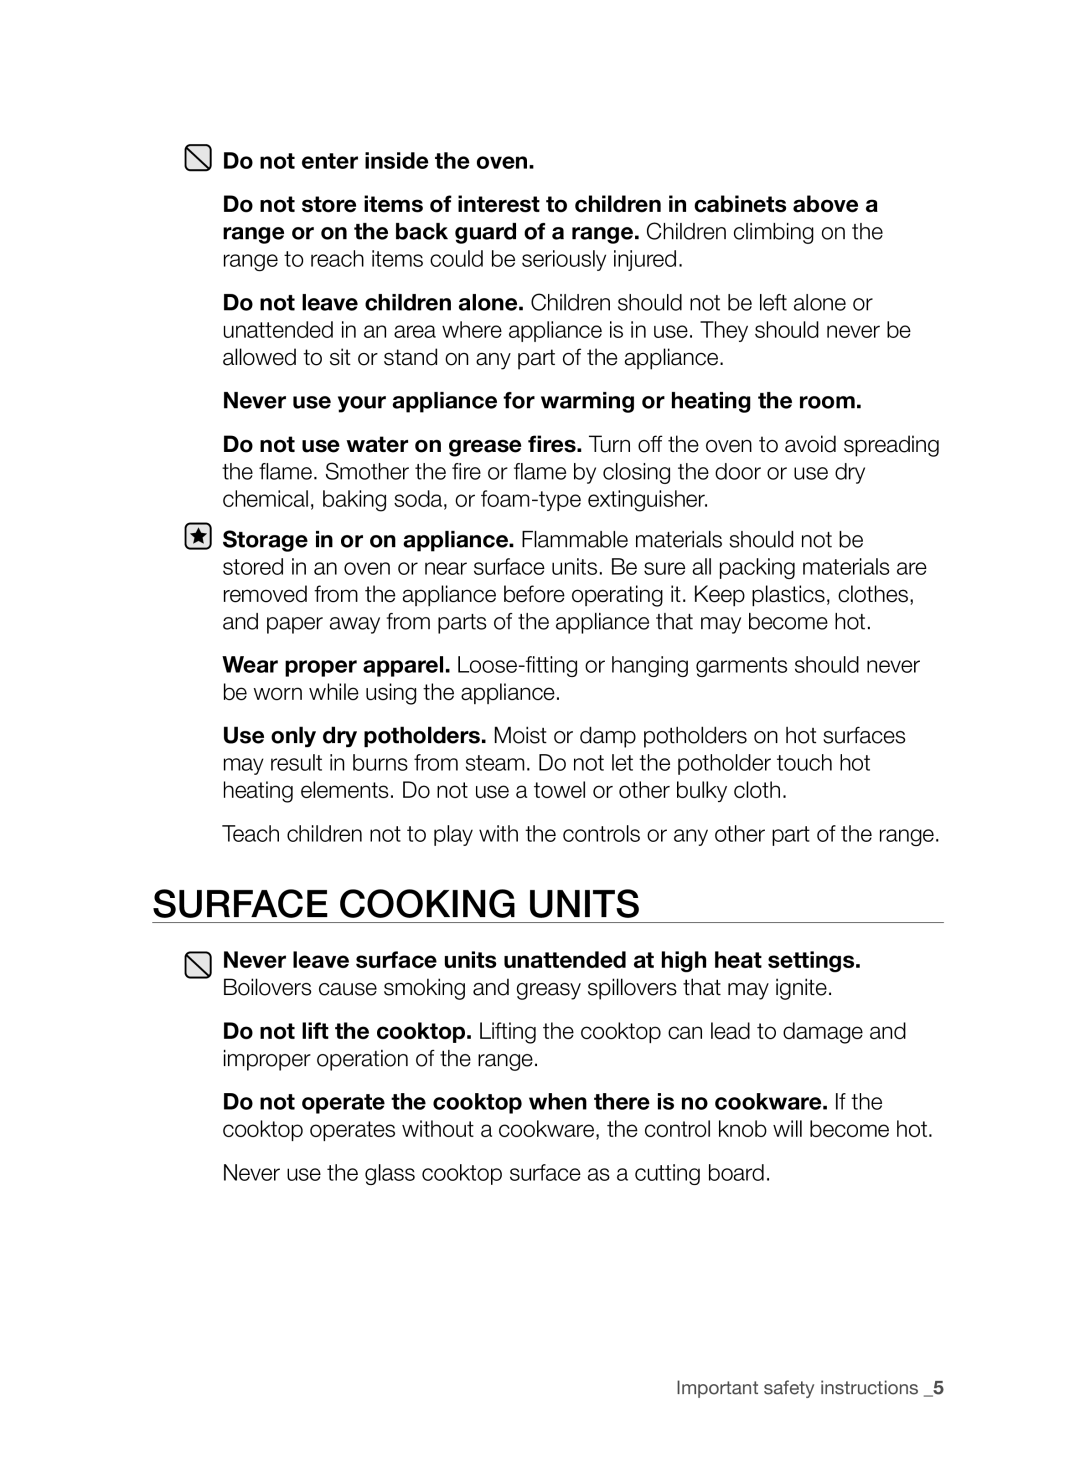 Samsung DG68-00294A, FE-R700WX user manual Surface Cooking Units, Do not enter inside the oven 